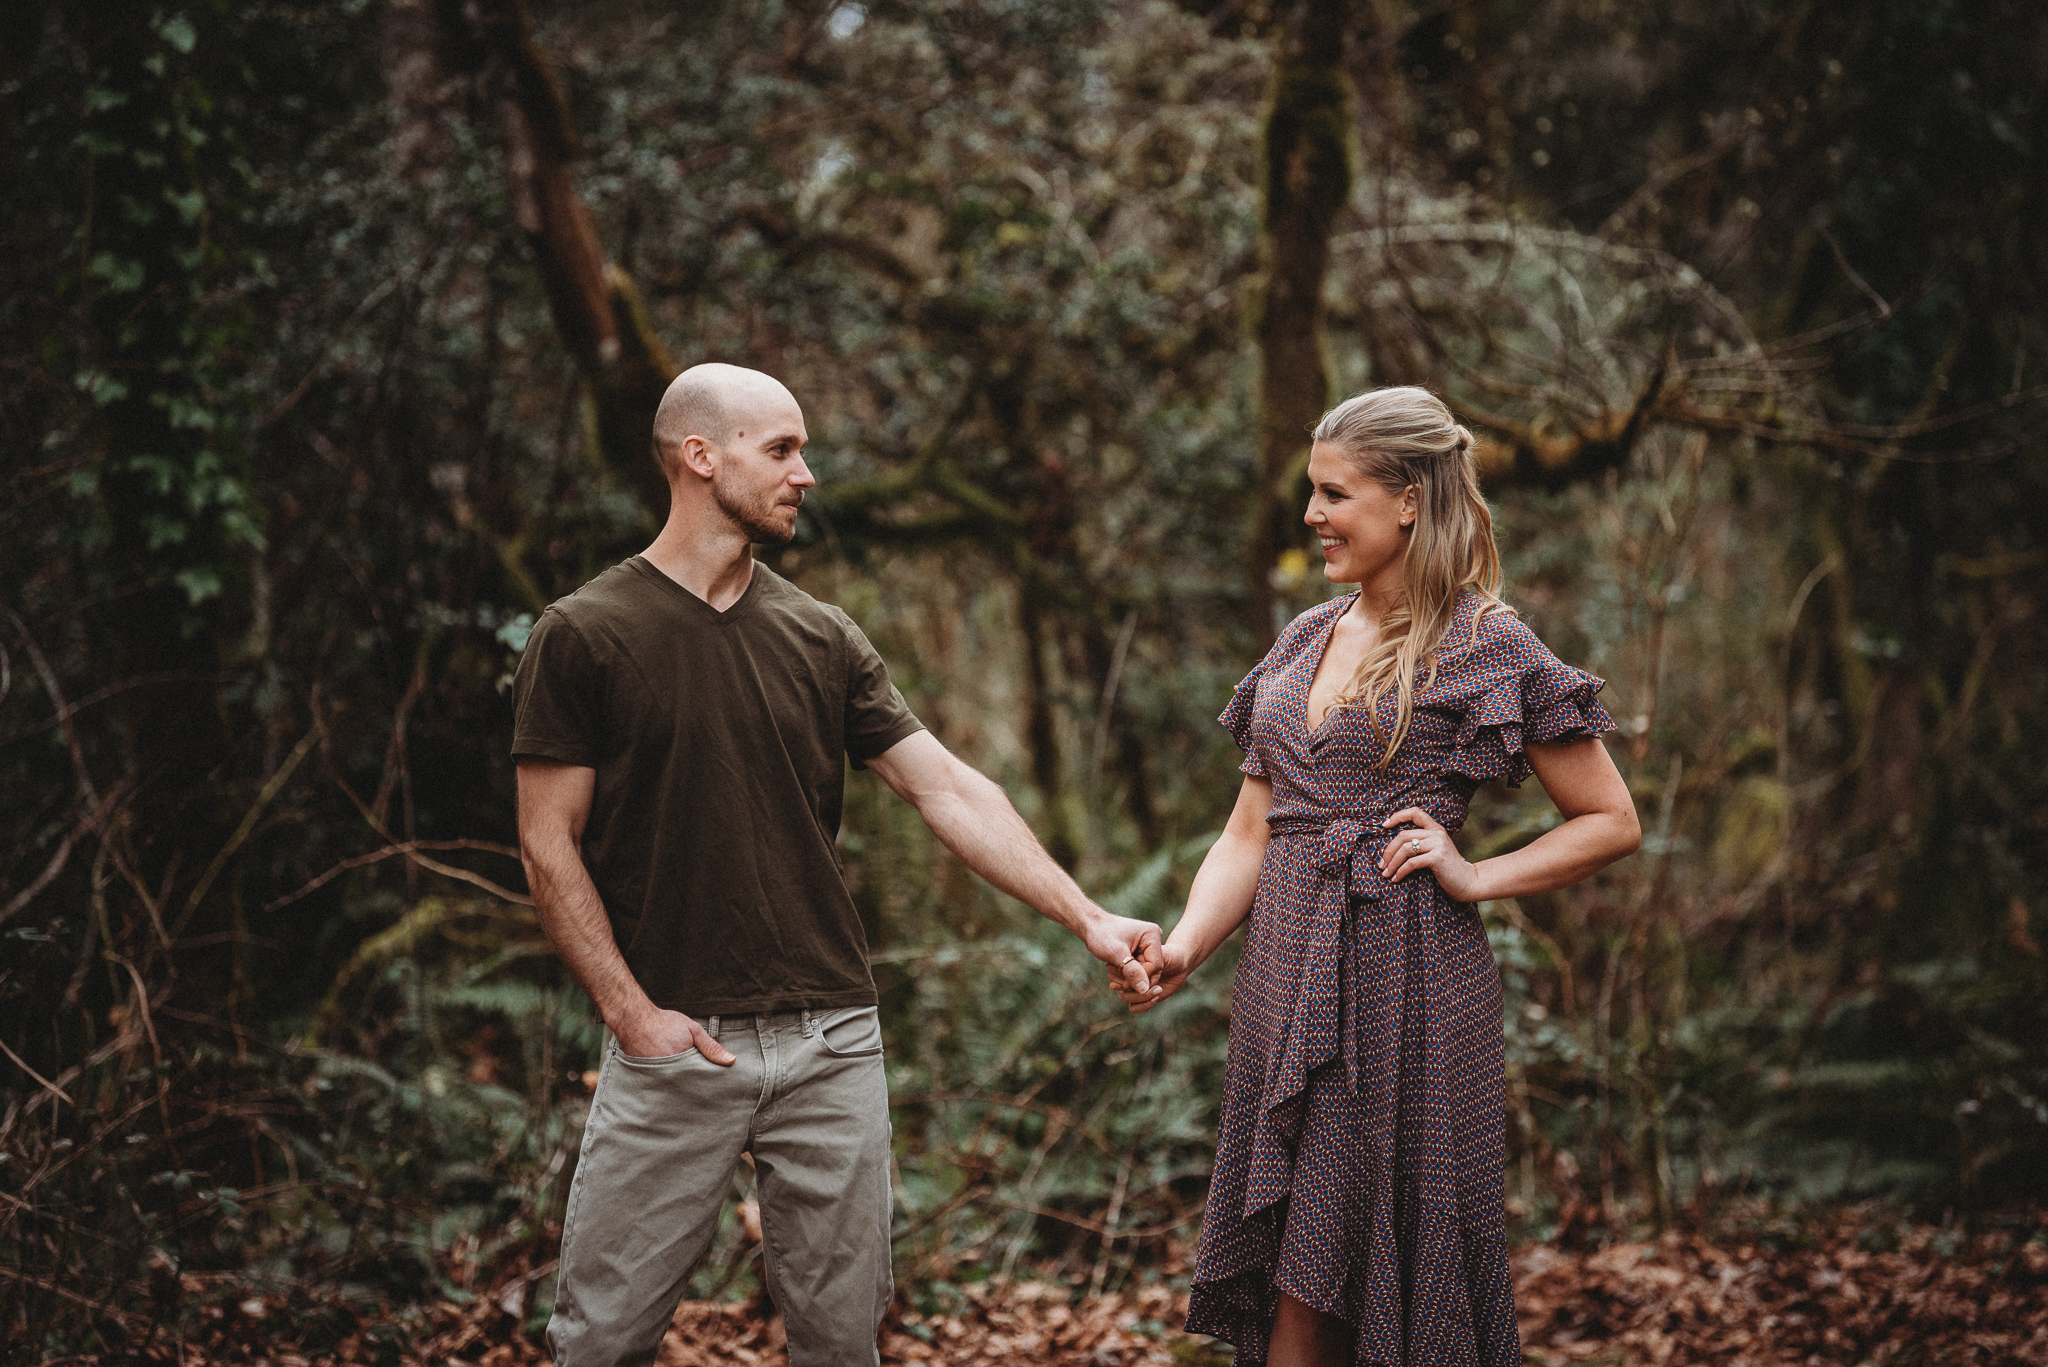 Forest Engagement Photo